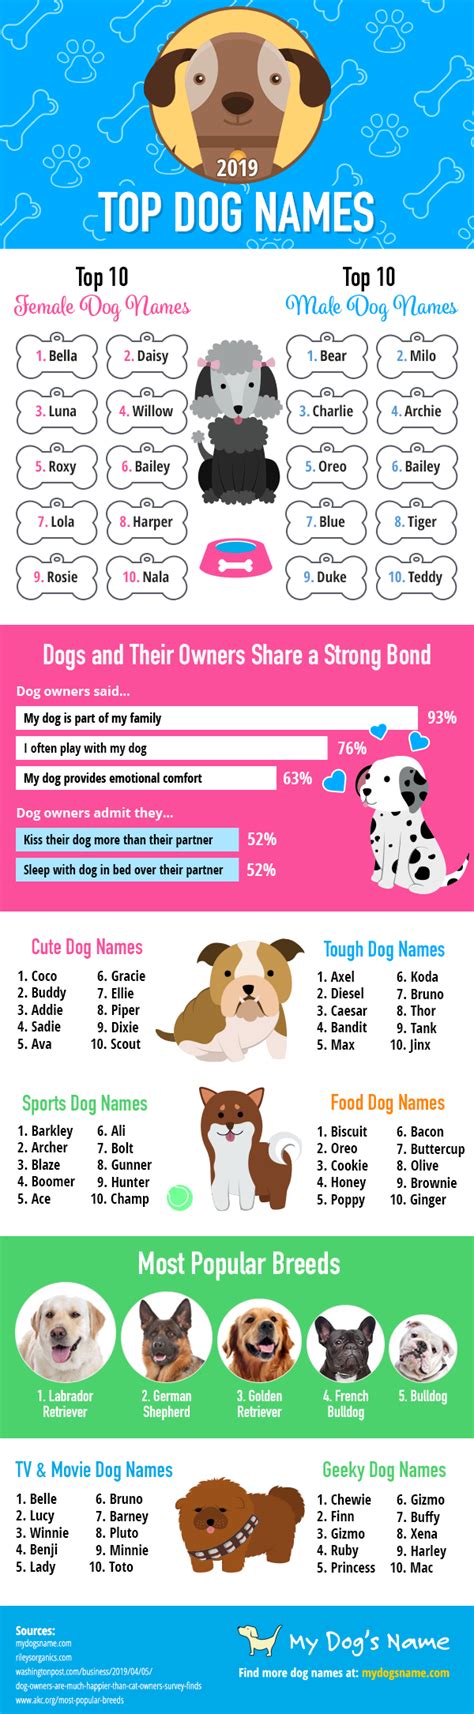 Top Dog Names Of 2019 Infographic The Most Popular Dog Names Top